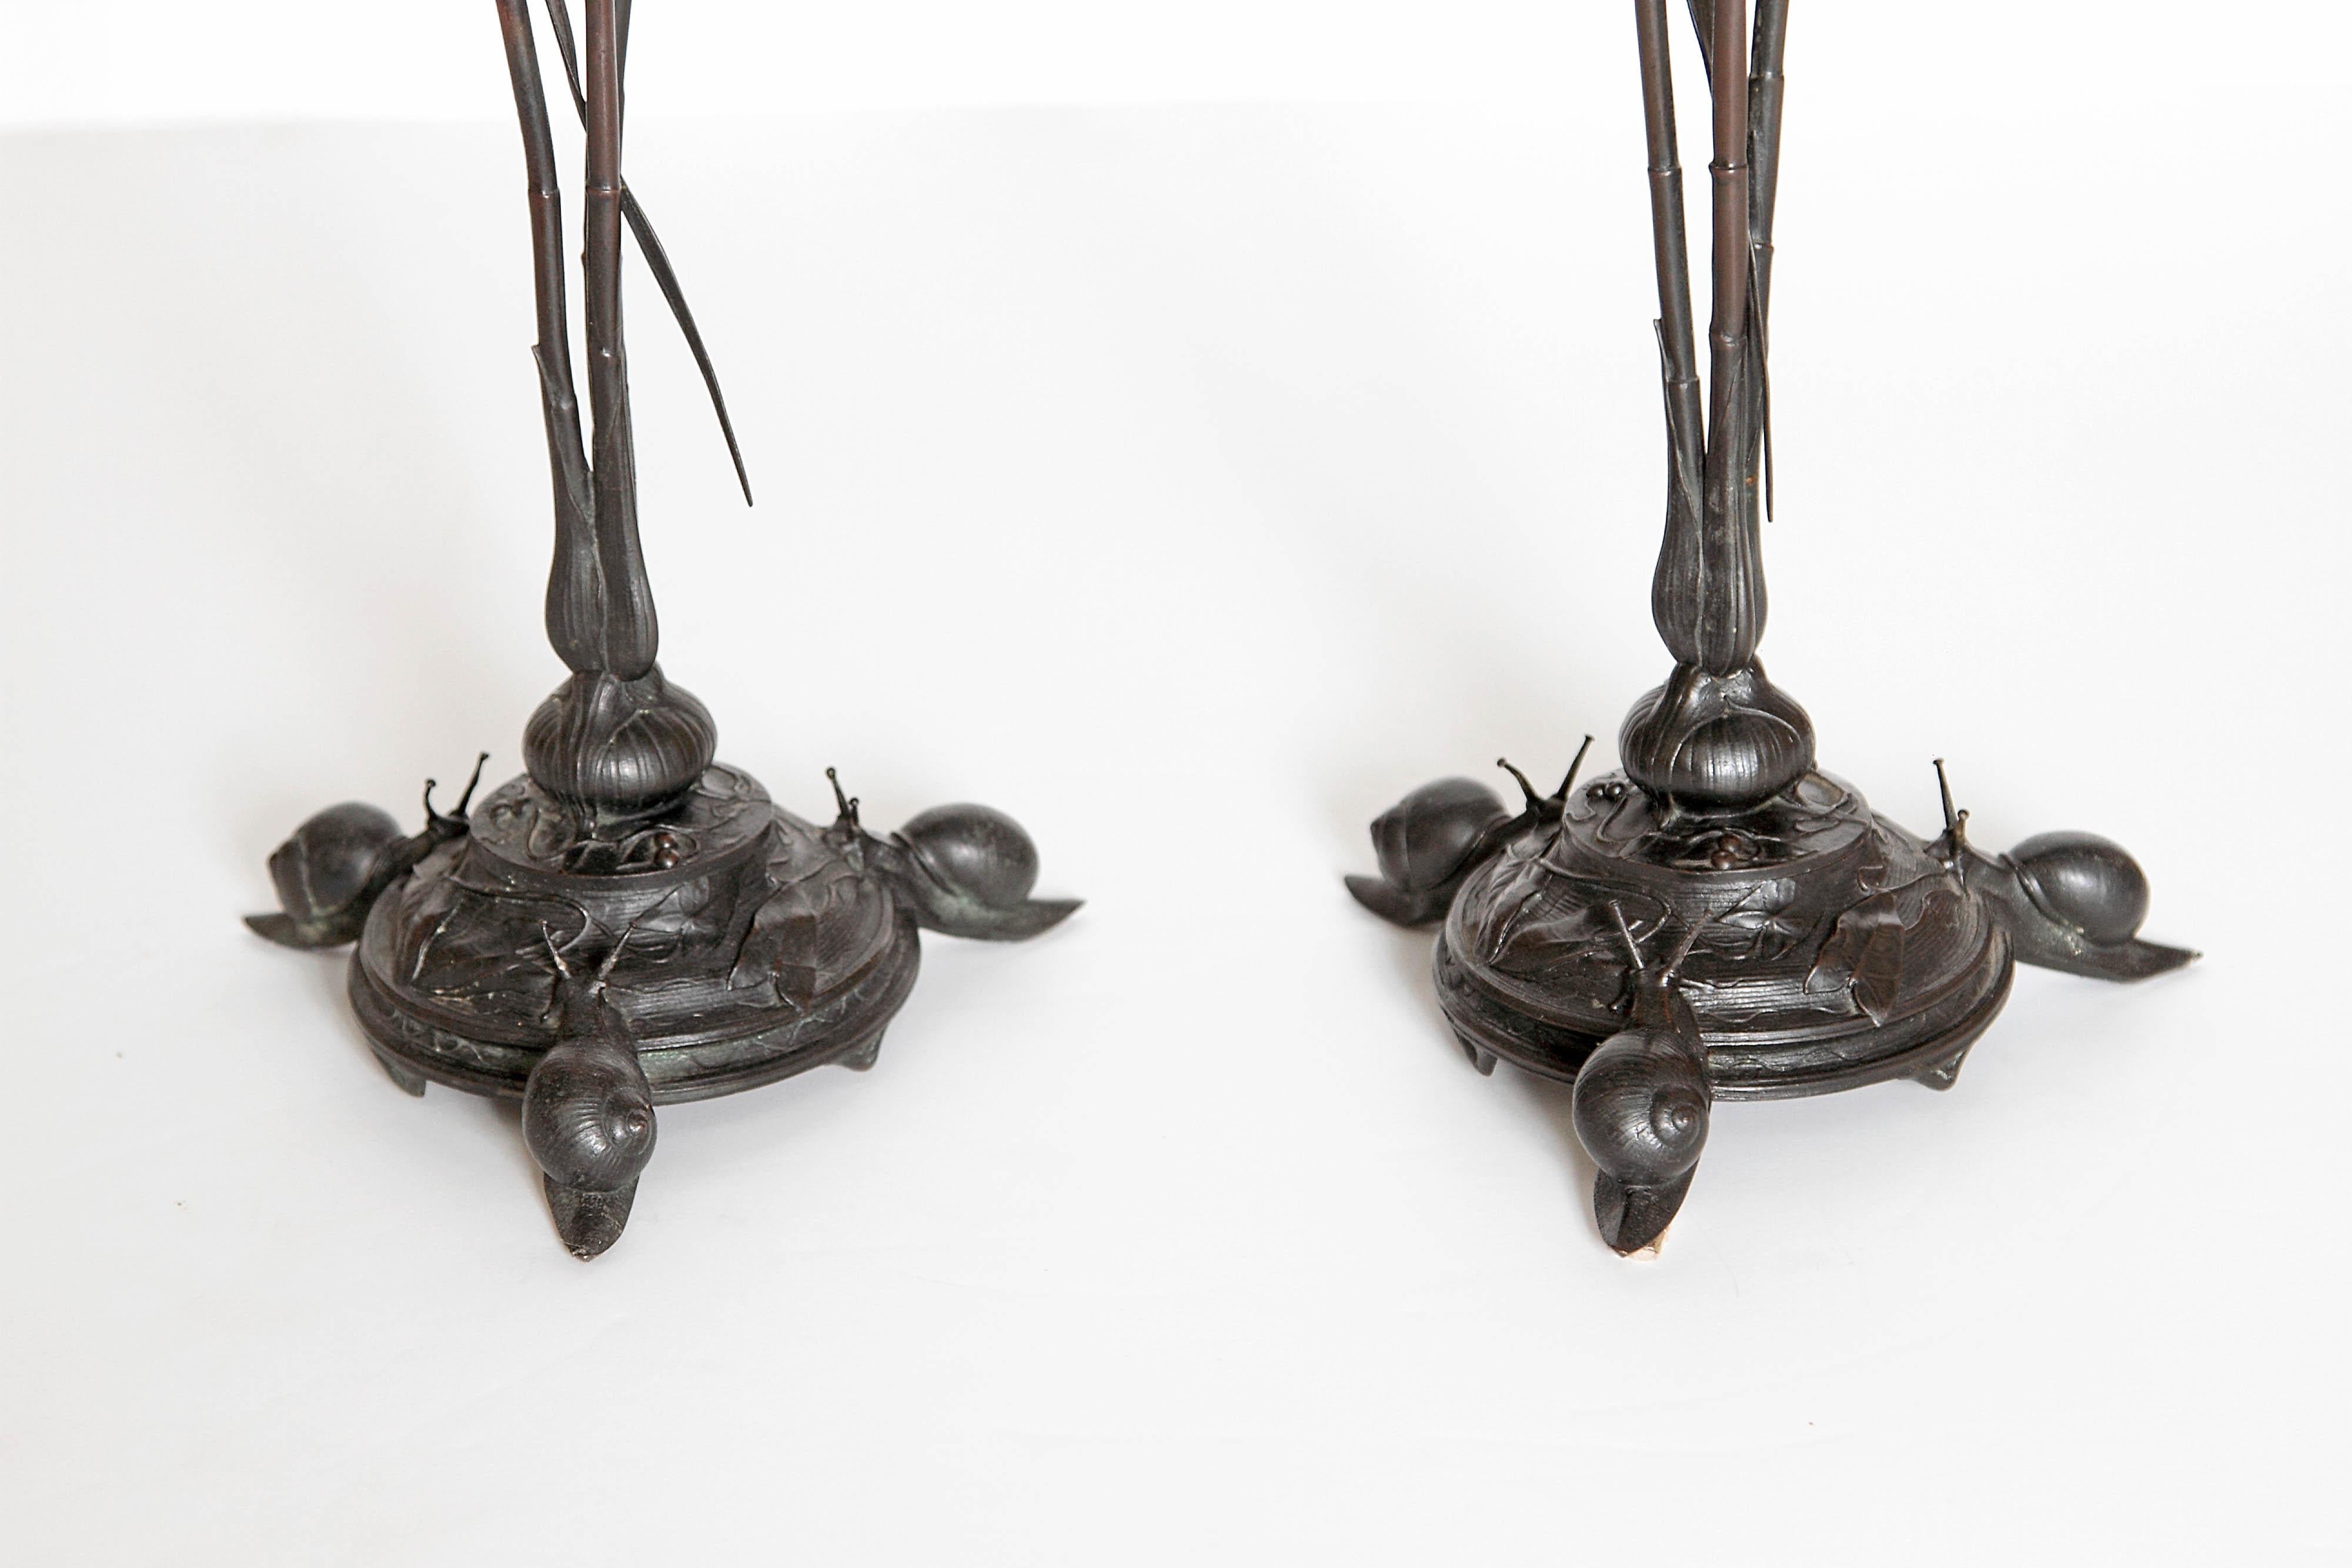 Auguste-Nicolas Cain, Pair of French Candelabra with Bird's Nest 2